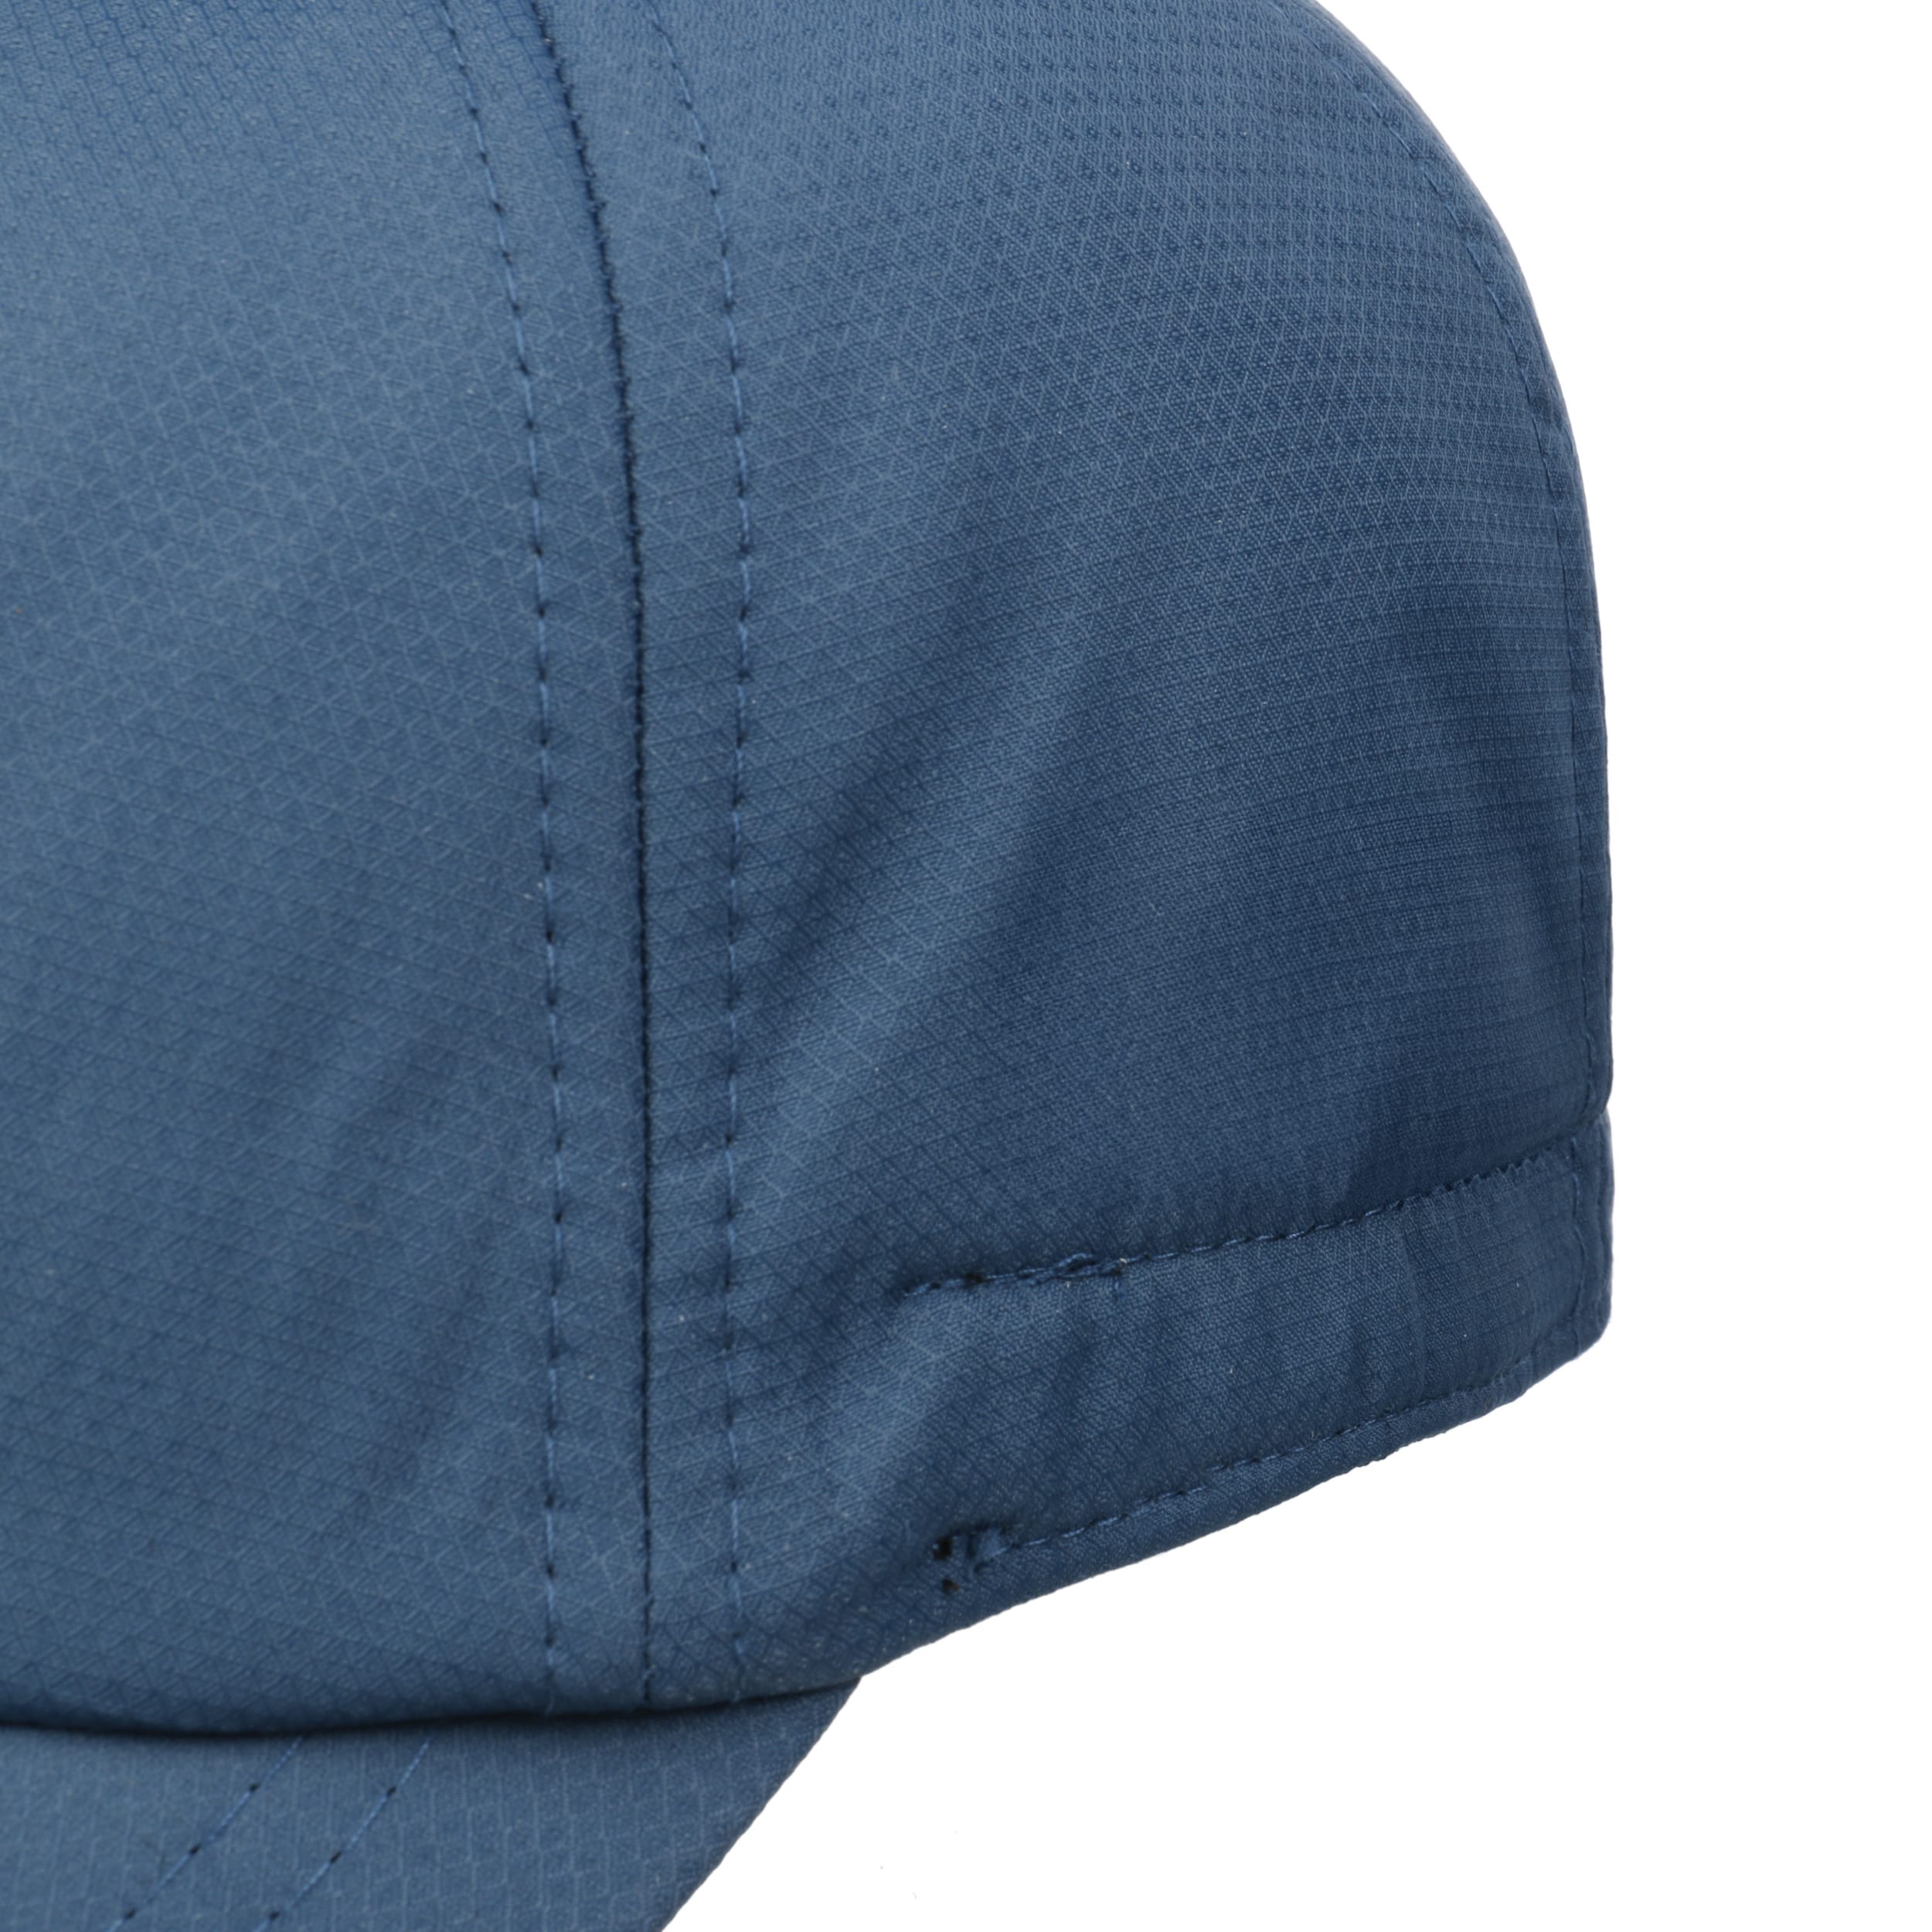 3M Thinsulate Cap mit 29,95 by € - Lipodo Ohrenklappen